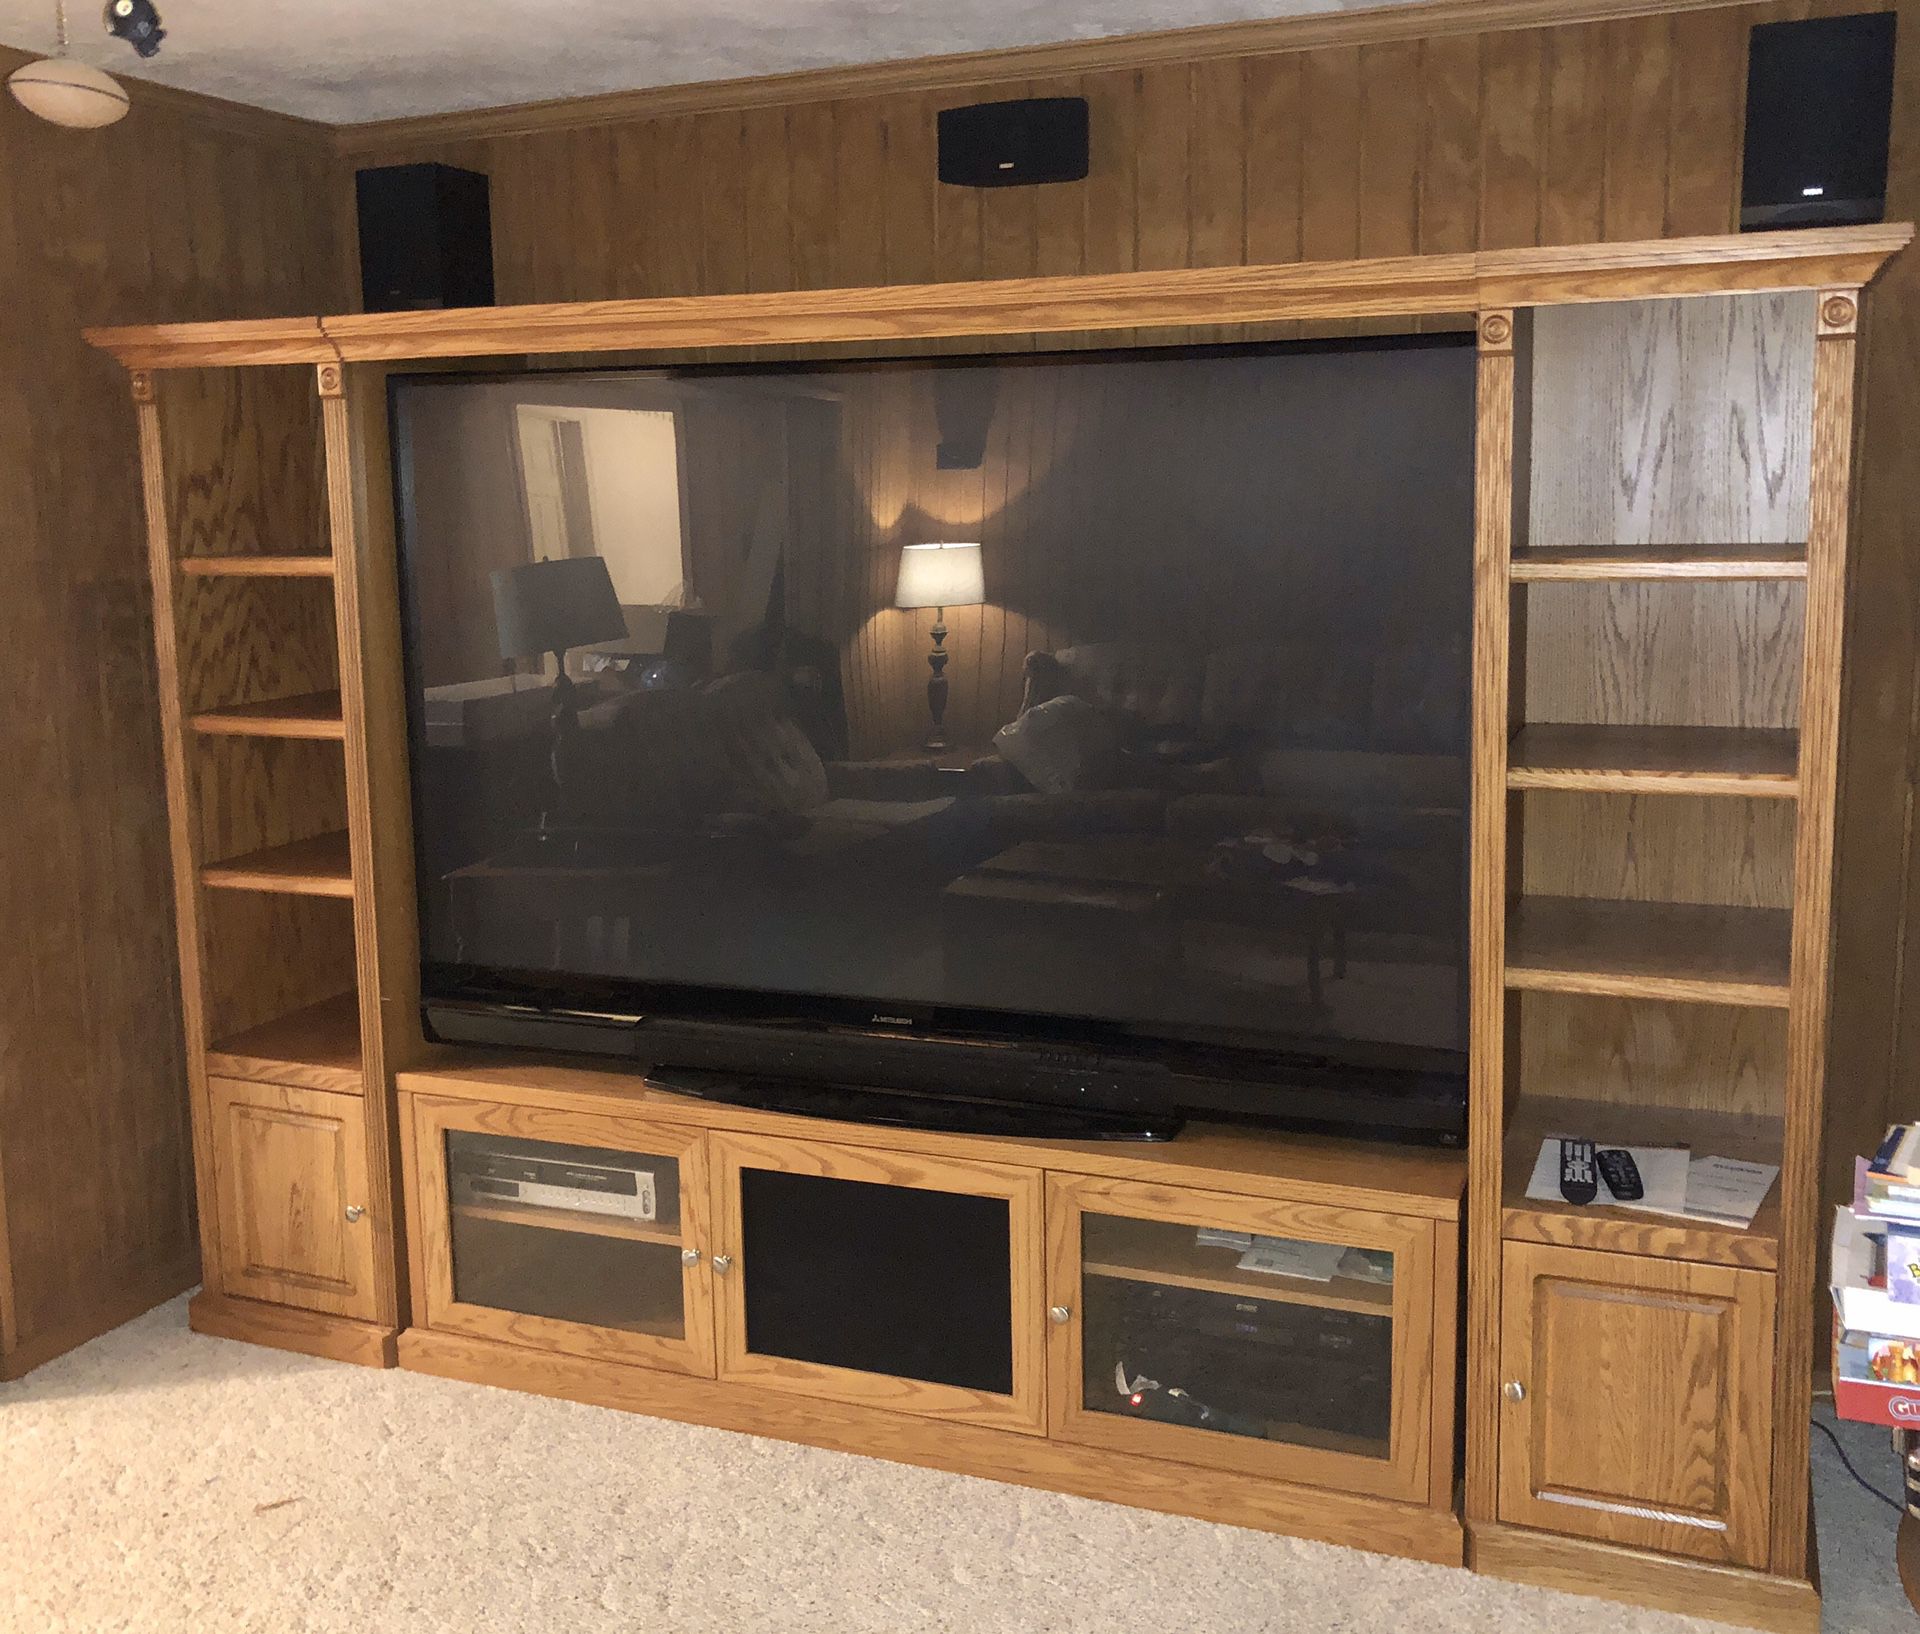 80” TV with surround sound and wooden cabinet